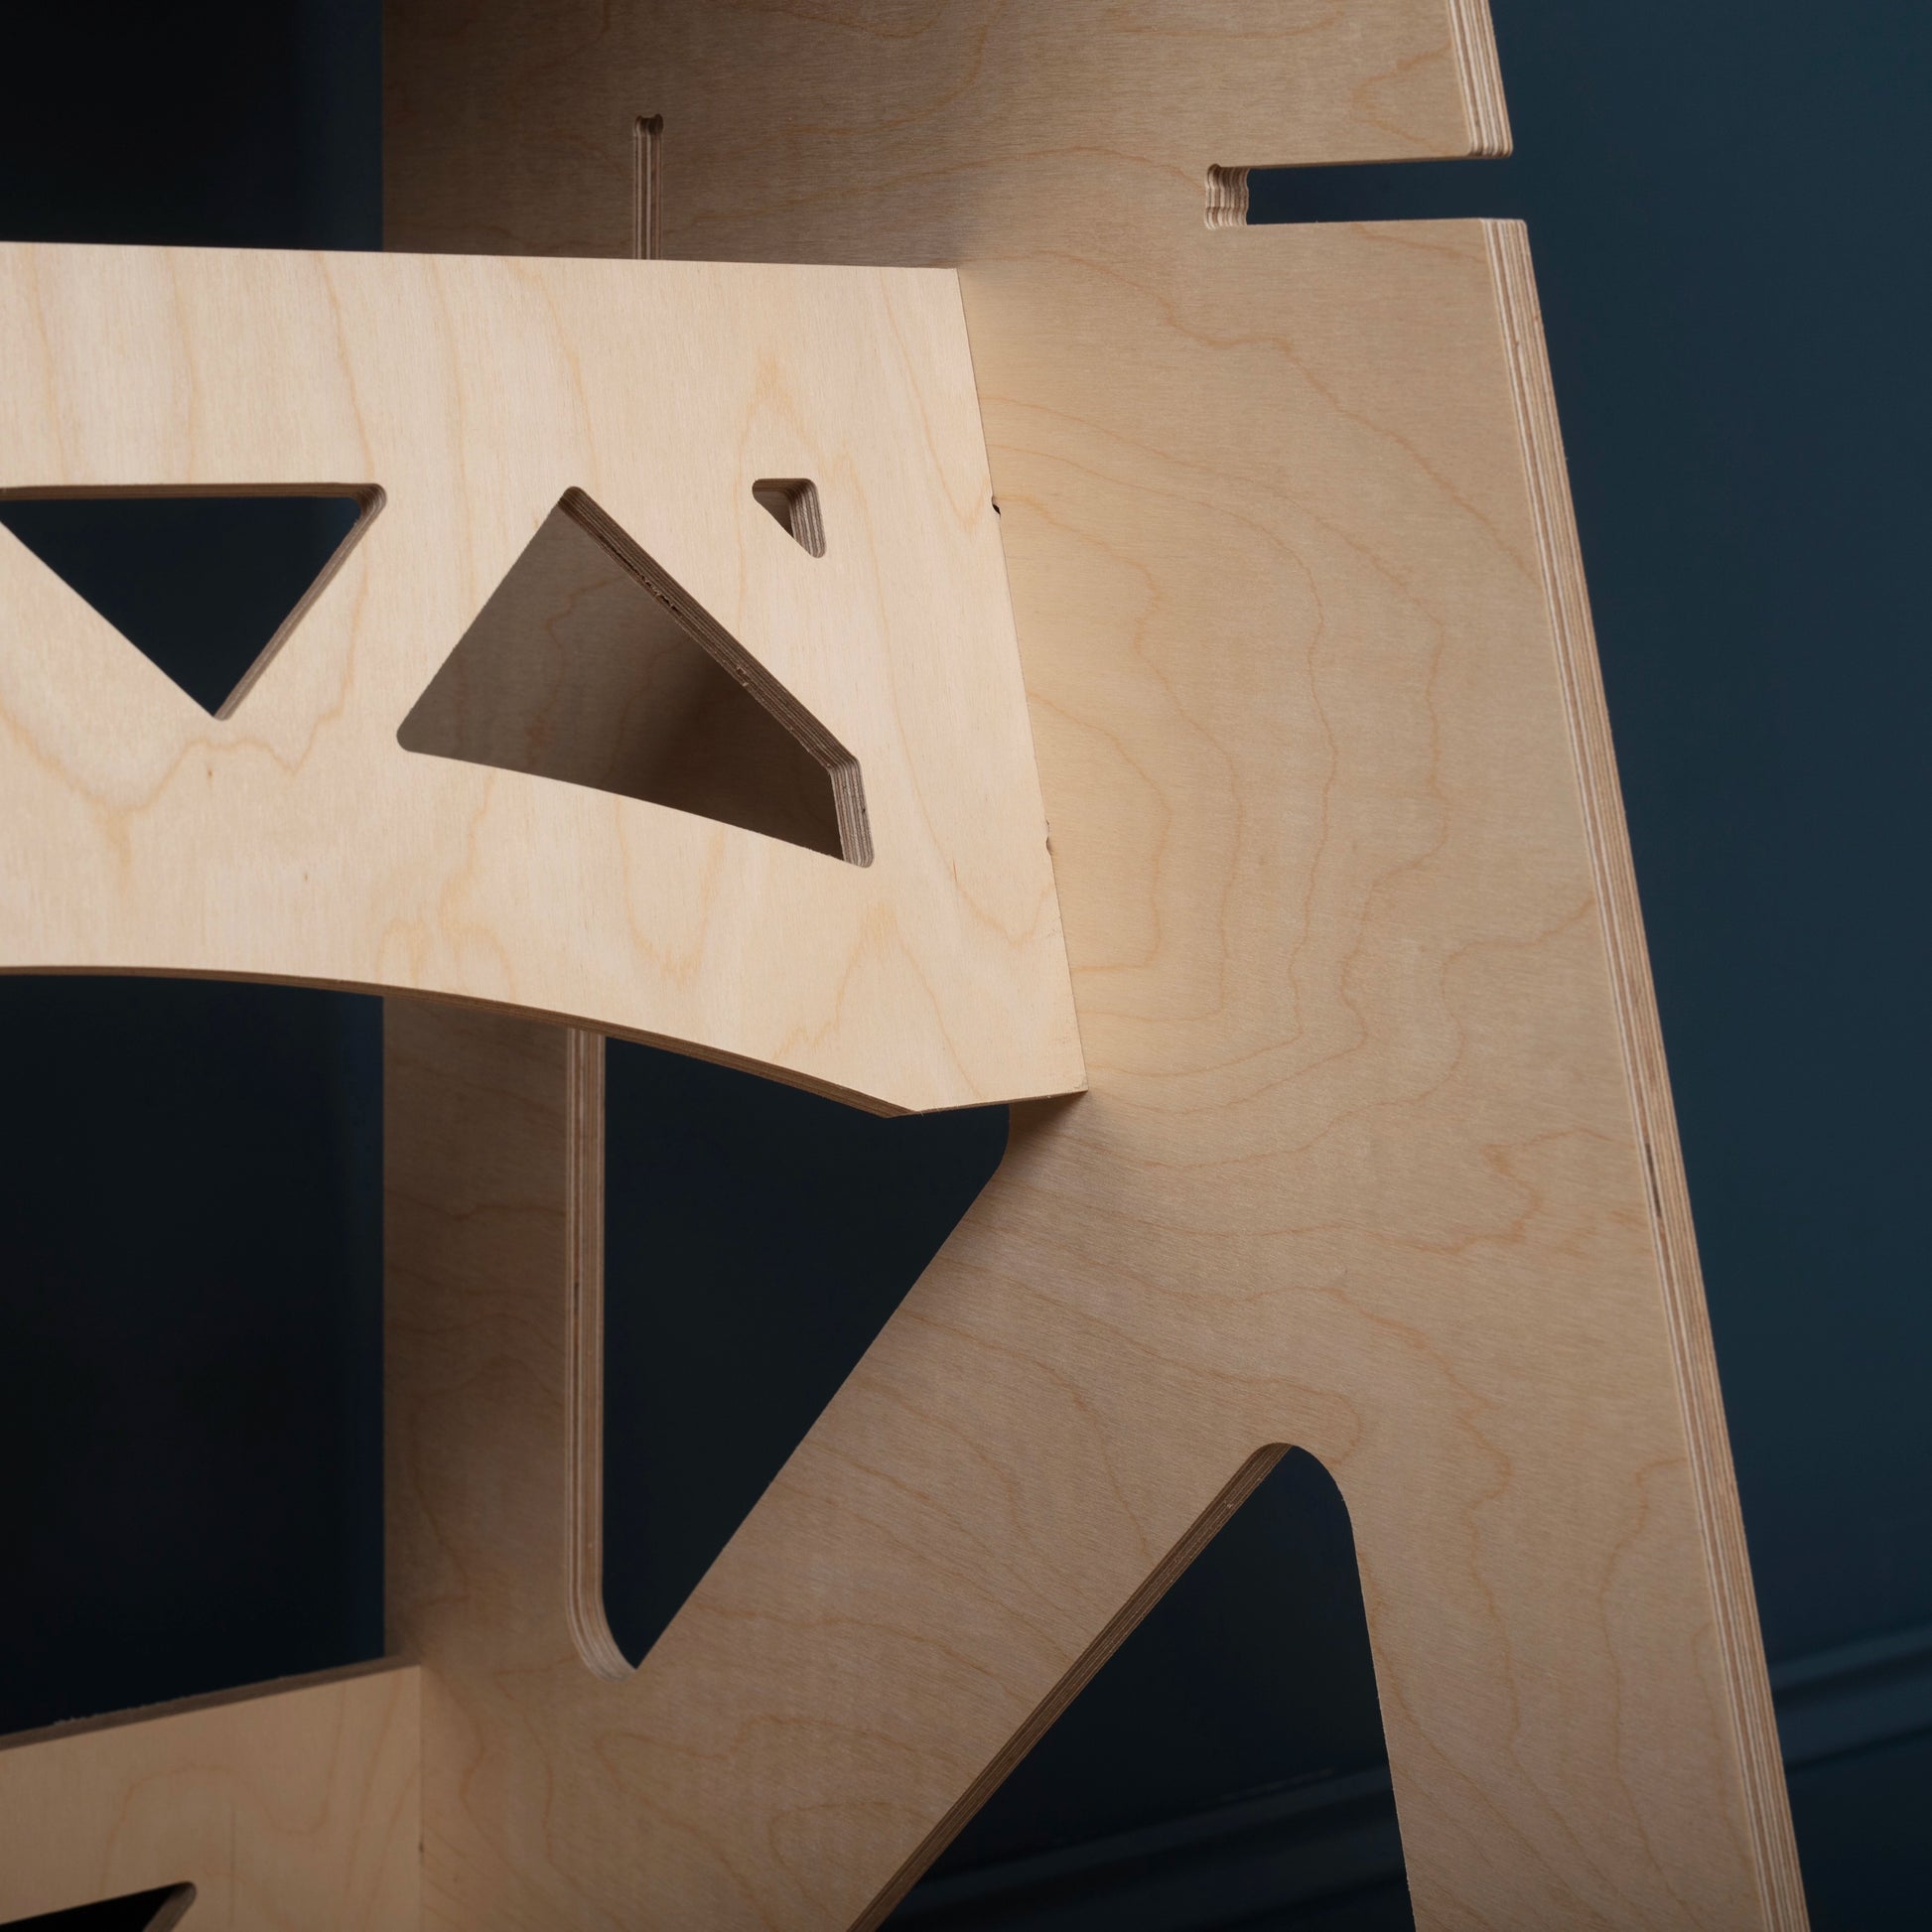 close up of triangle cut outs on birch plywood stand up/sit down desk against a dark blue wall